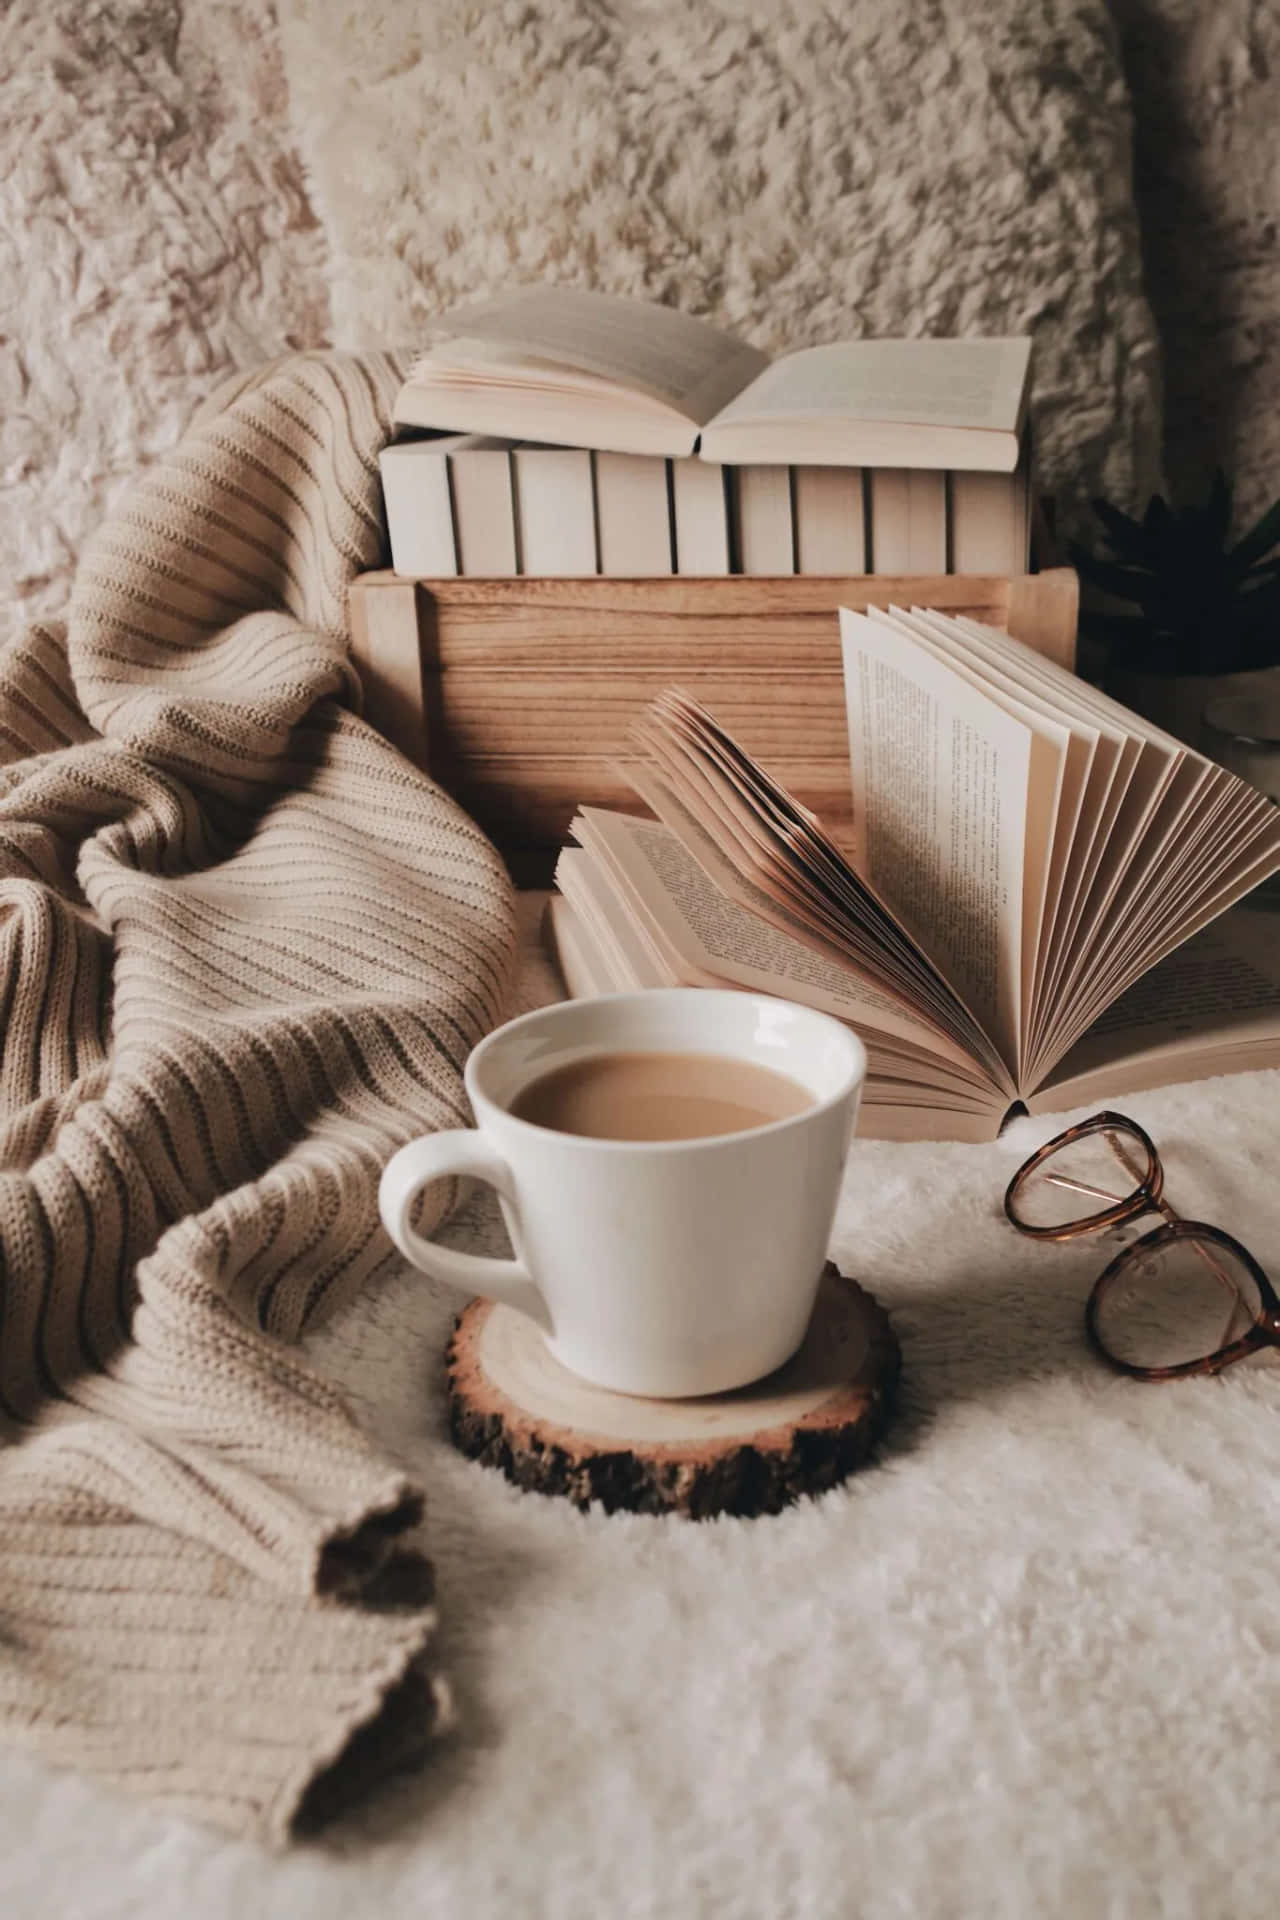 A Cup Of Coffee, Books, Glasses And A Blanket